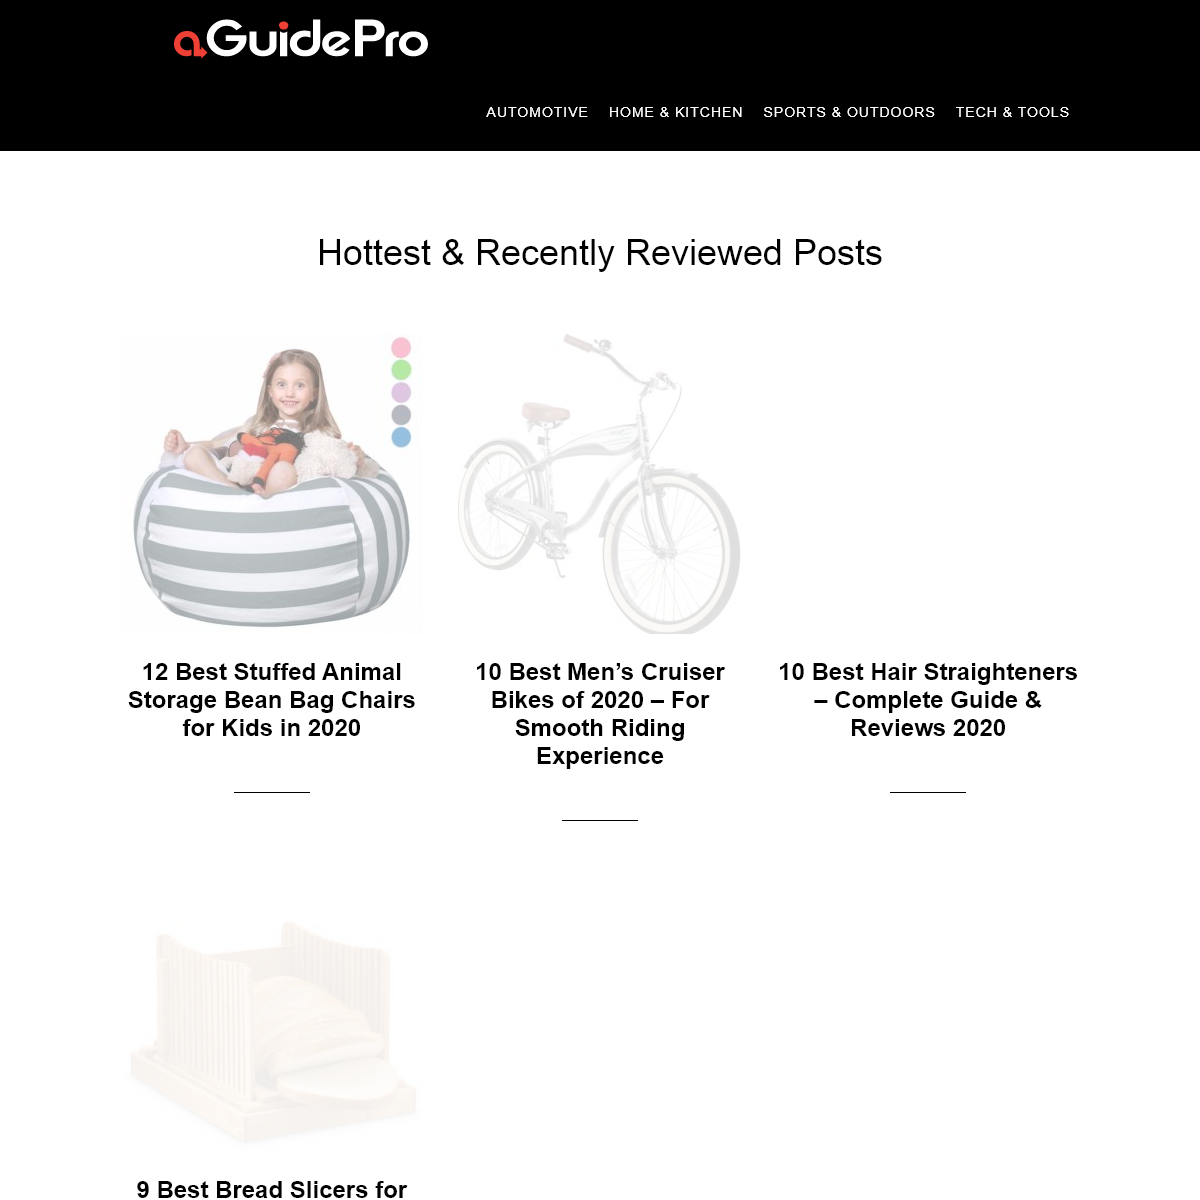 aGuidePro - Guide to Professional Products and Tools